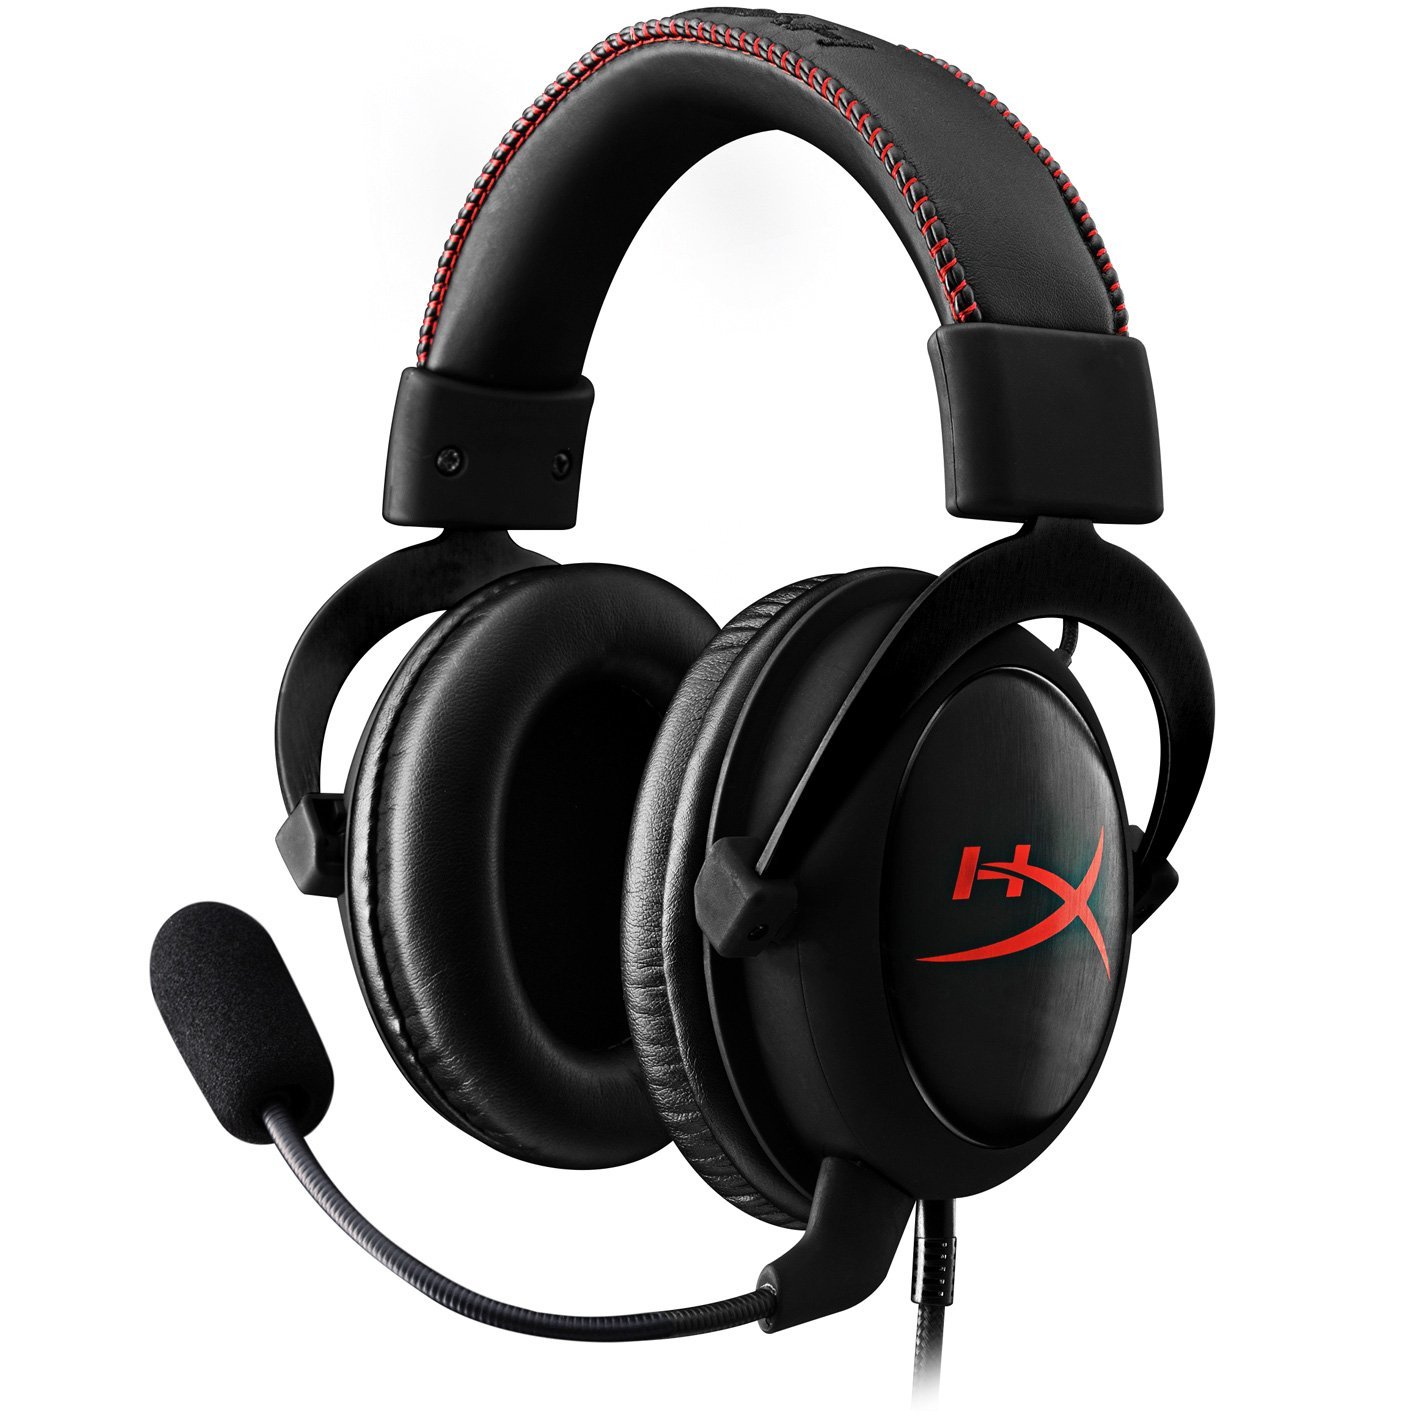 HyperX headset gaming call of duty mobile